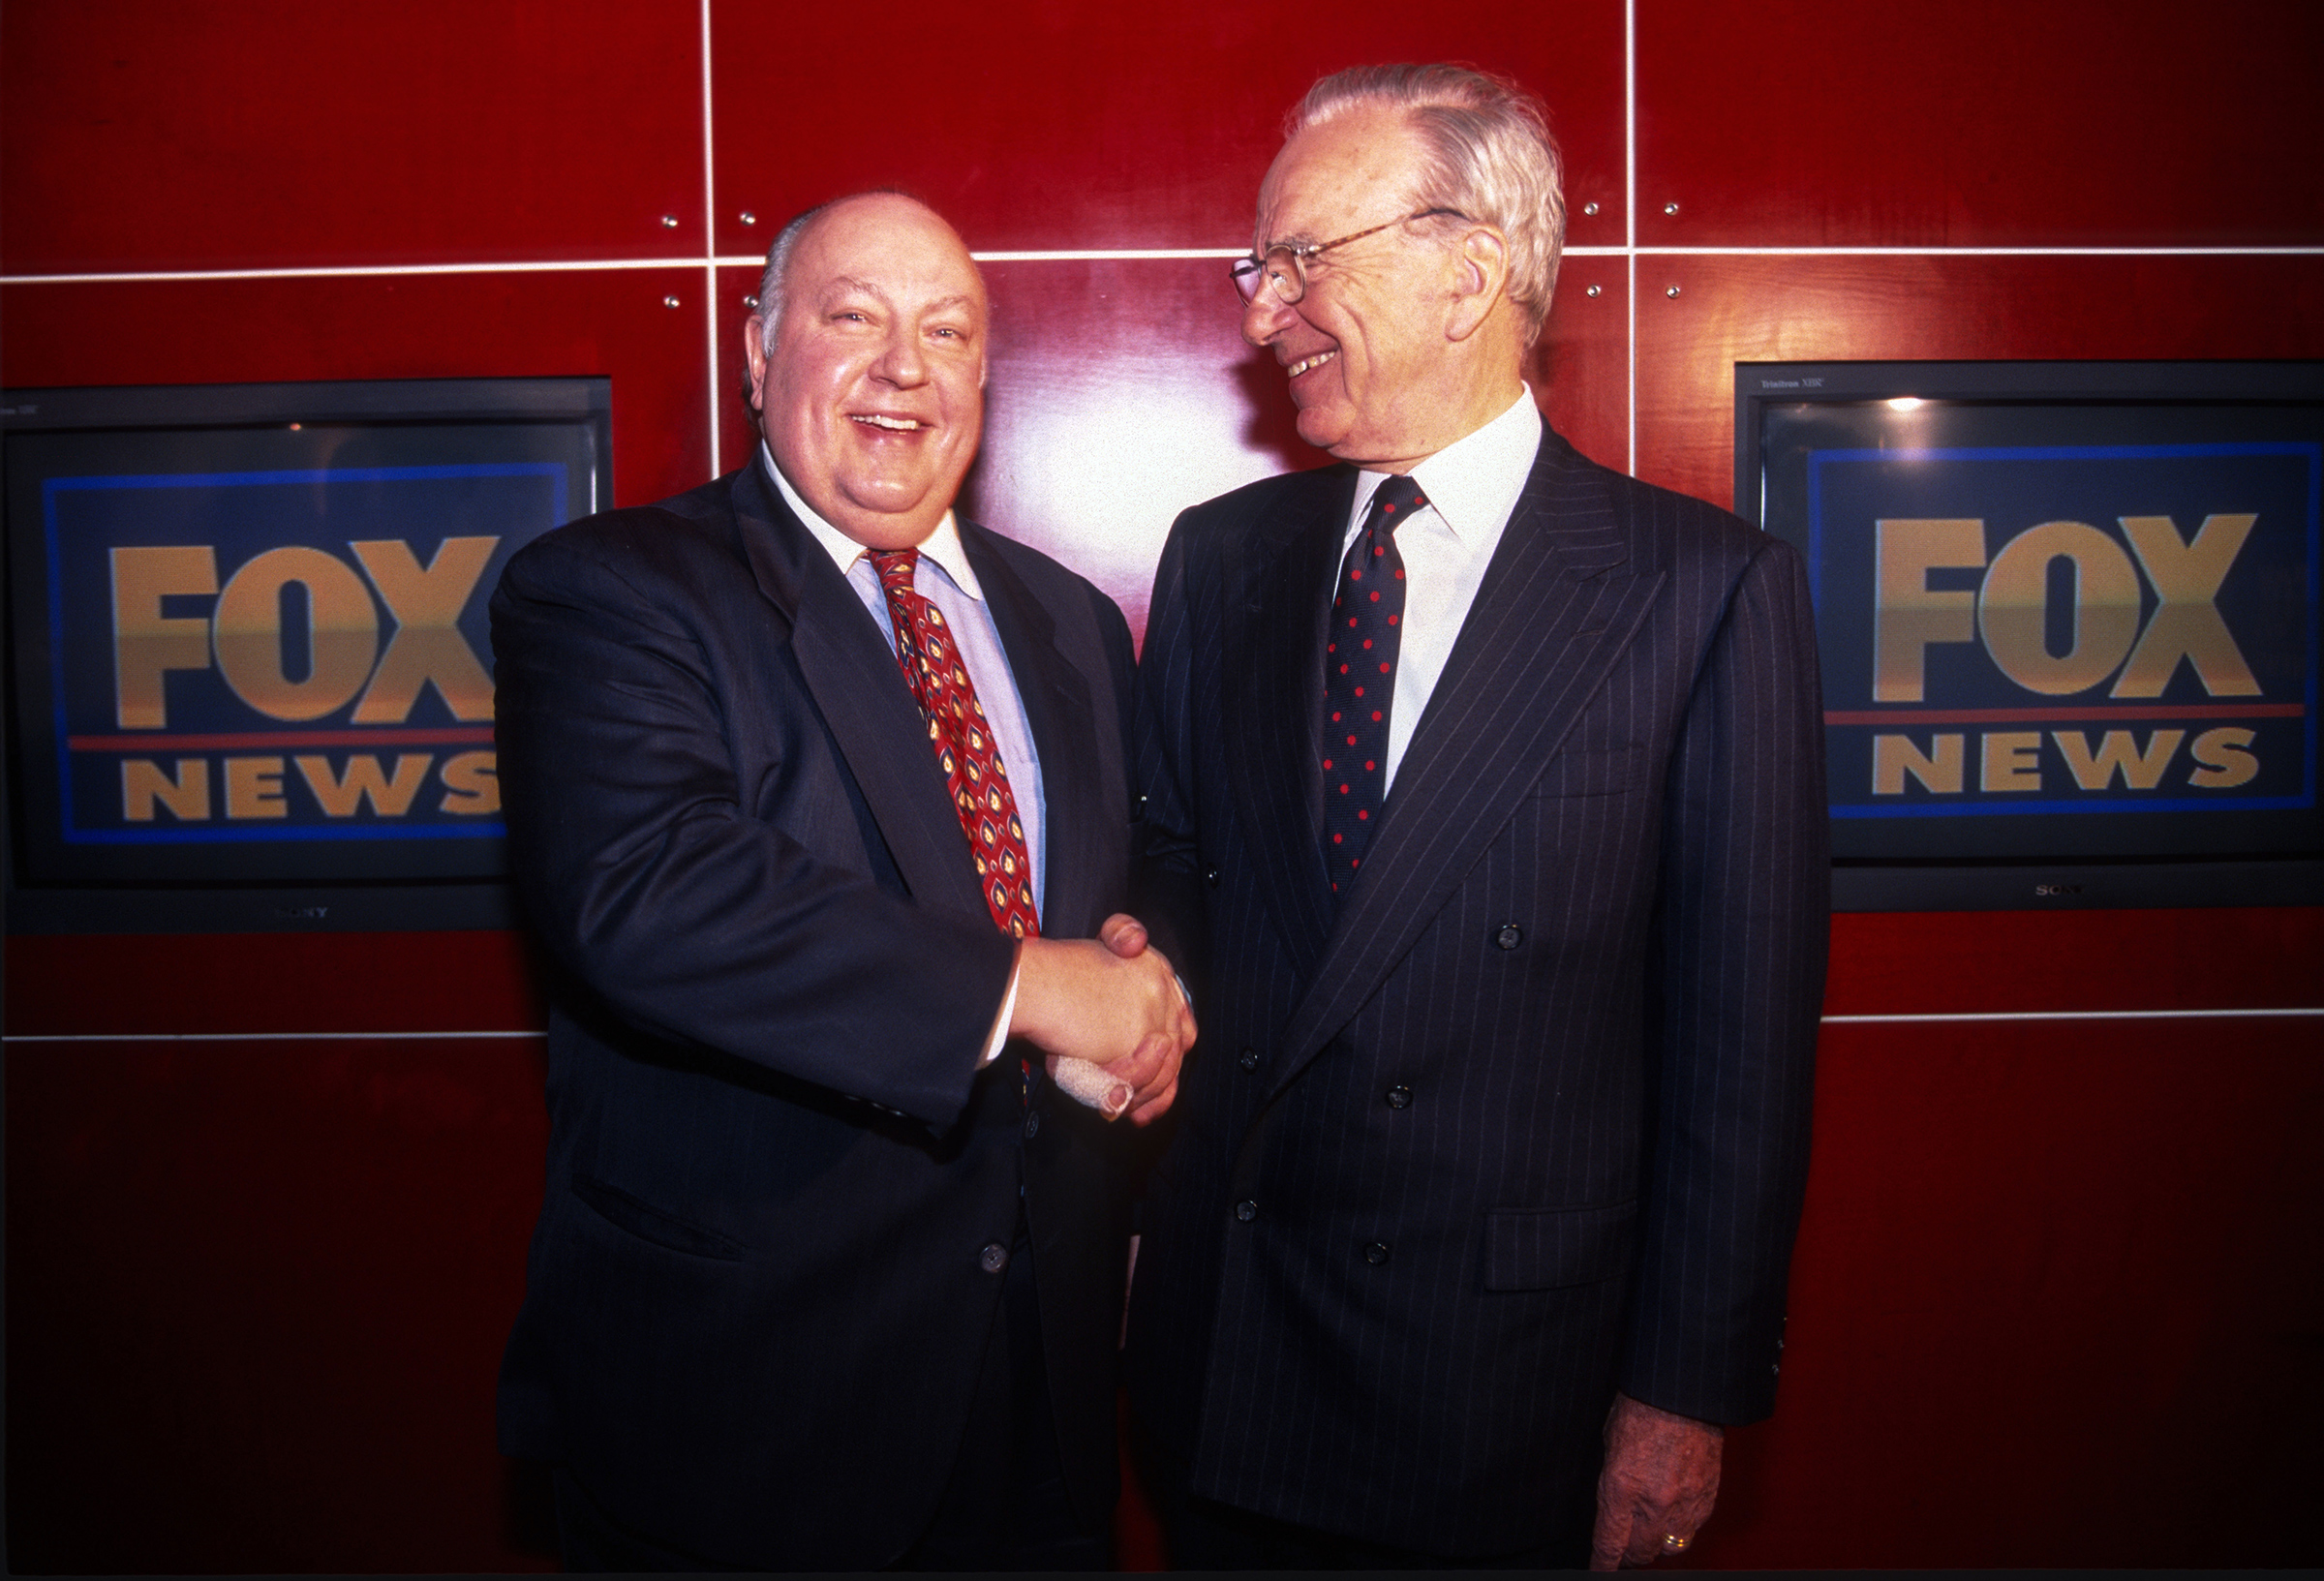 Rupert Murdoch shakes hands with Roger Ailes after naming Ailes the head of Fox News in New York City, Jan. 1996